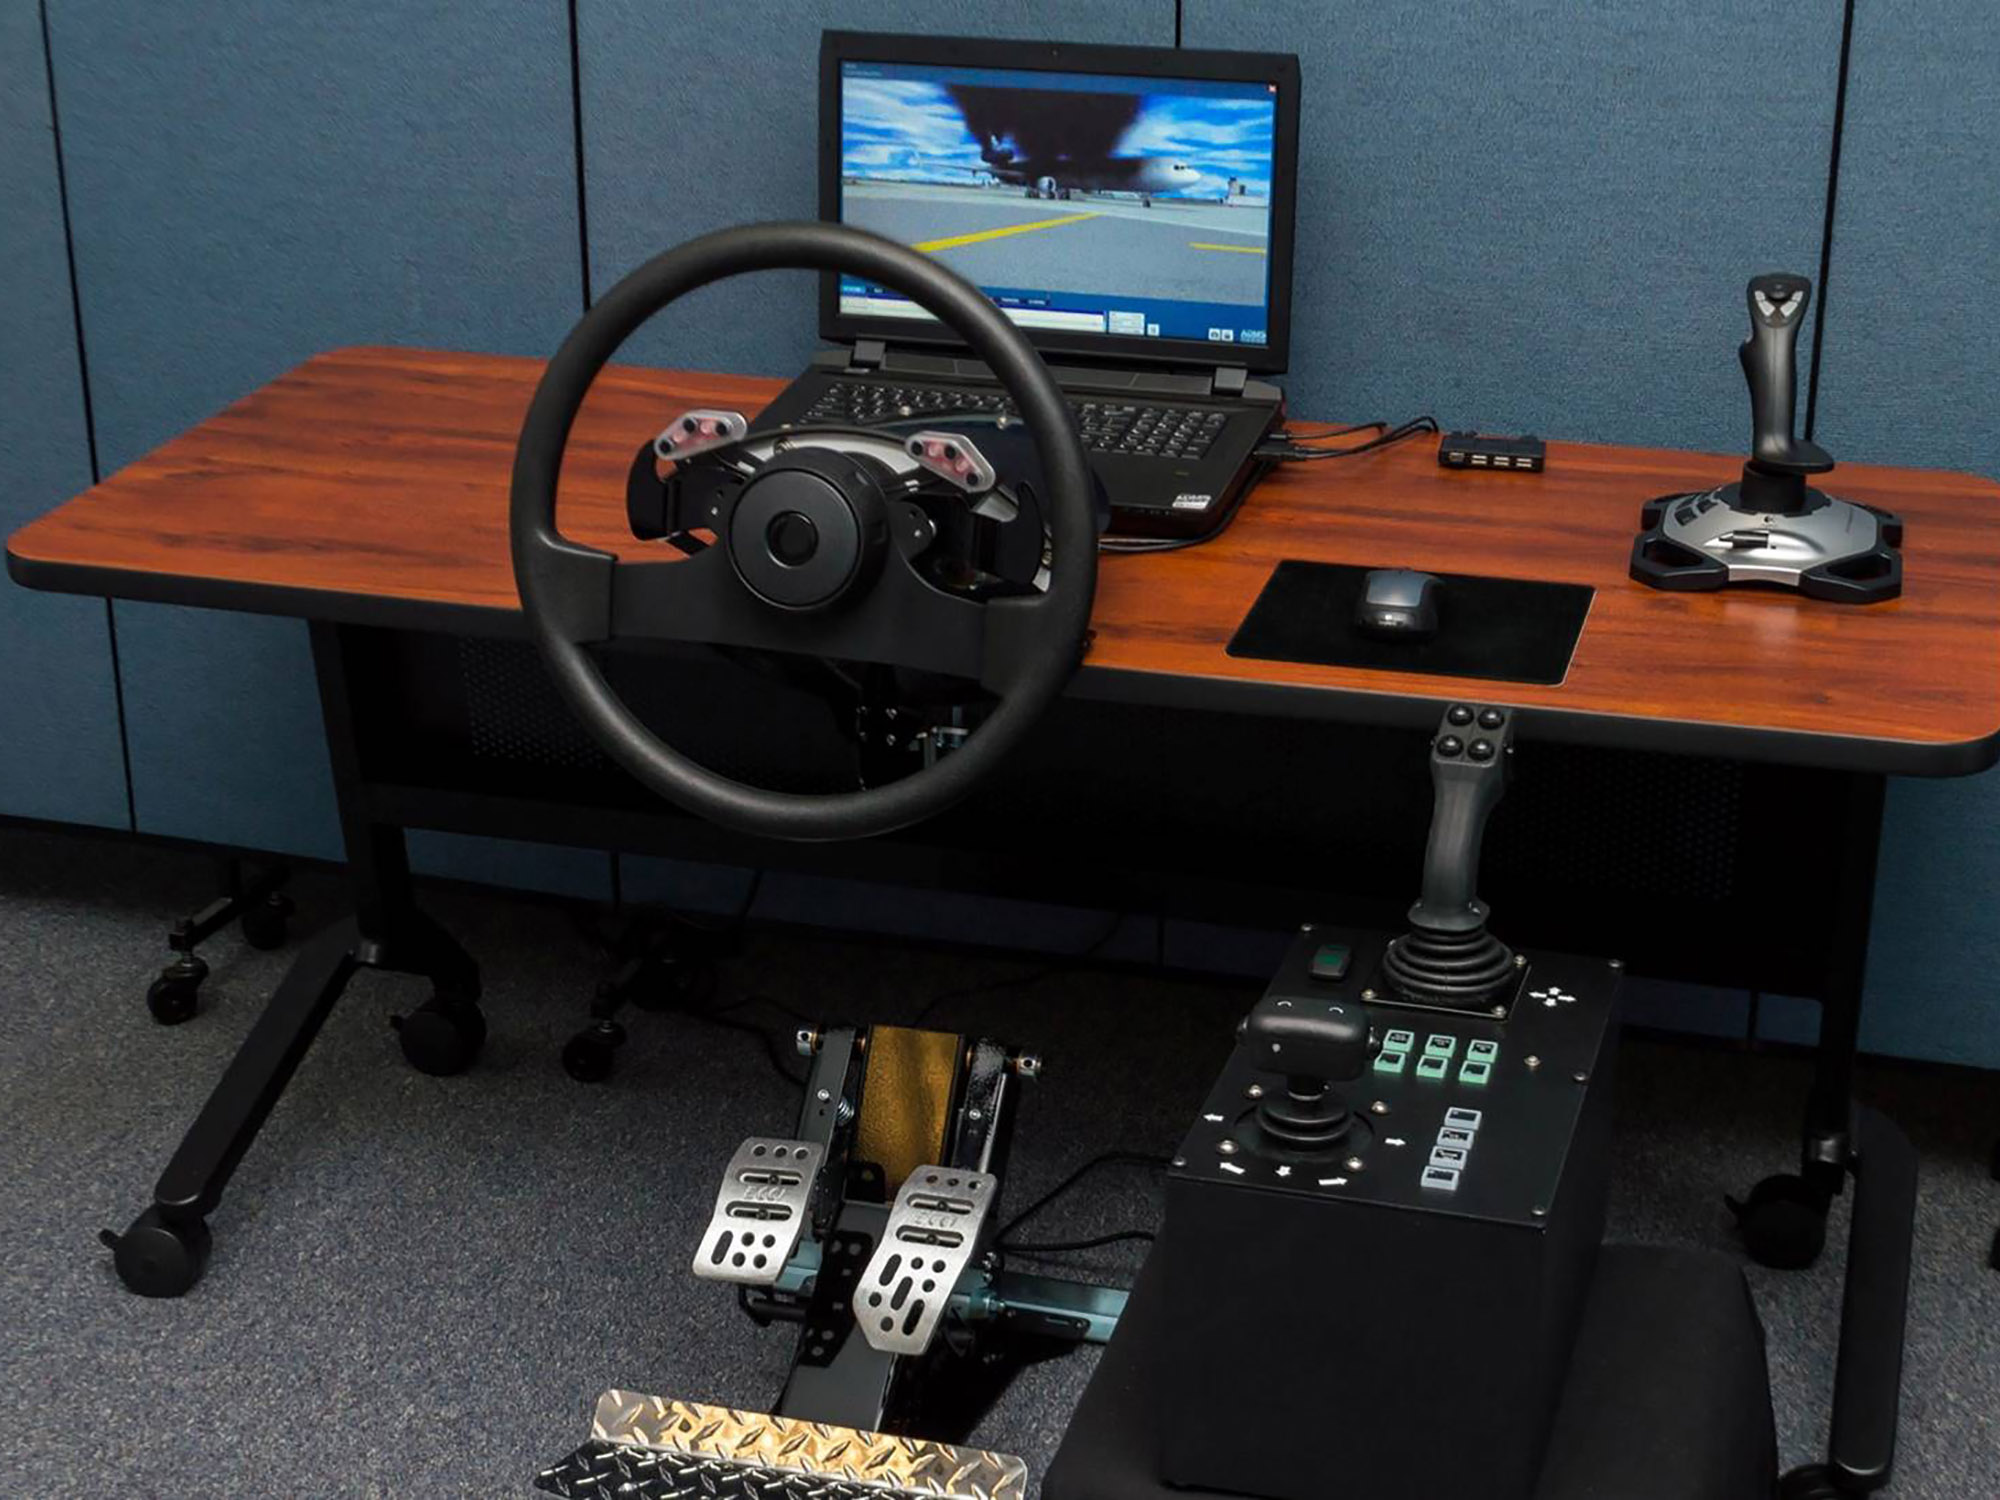 Desktop ARFF and Airport Drive Trainer consists of a generic steering wheel and controls packed in transportation cases.